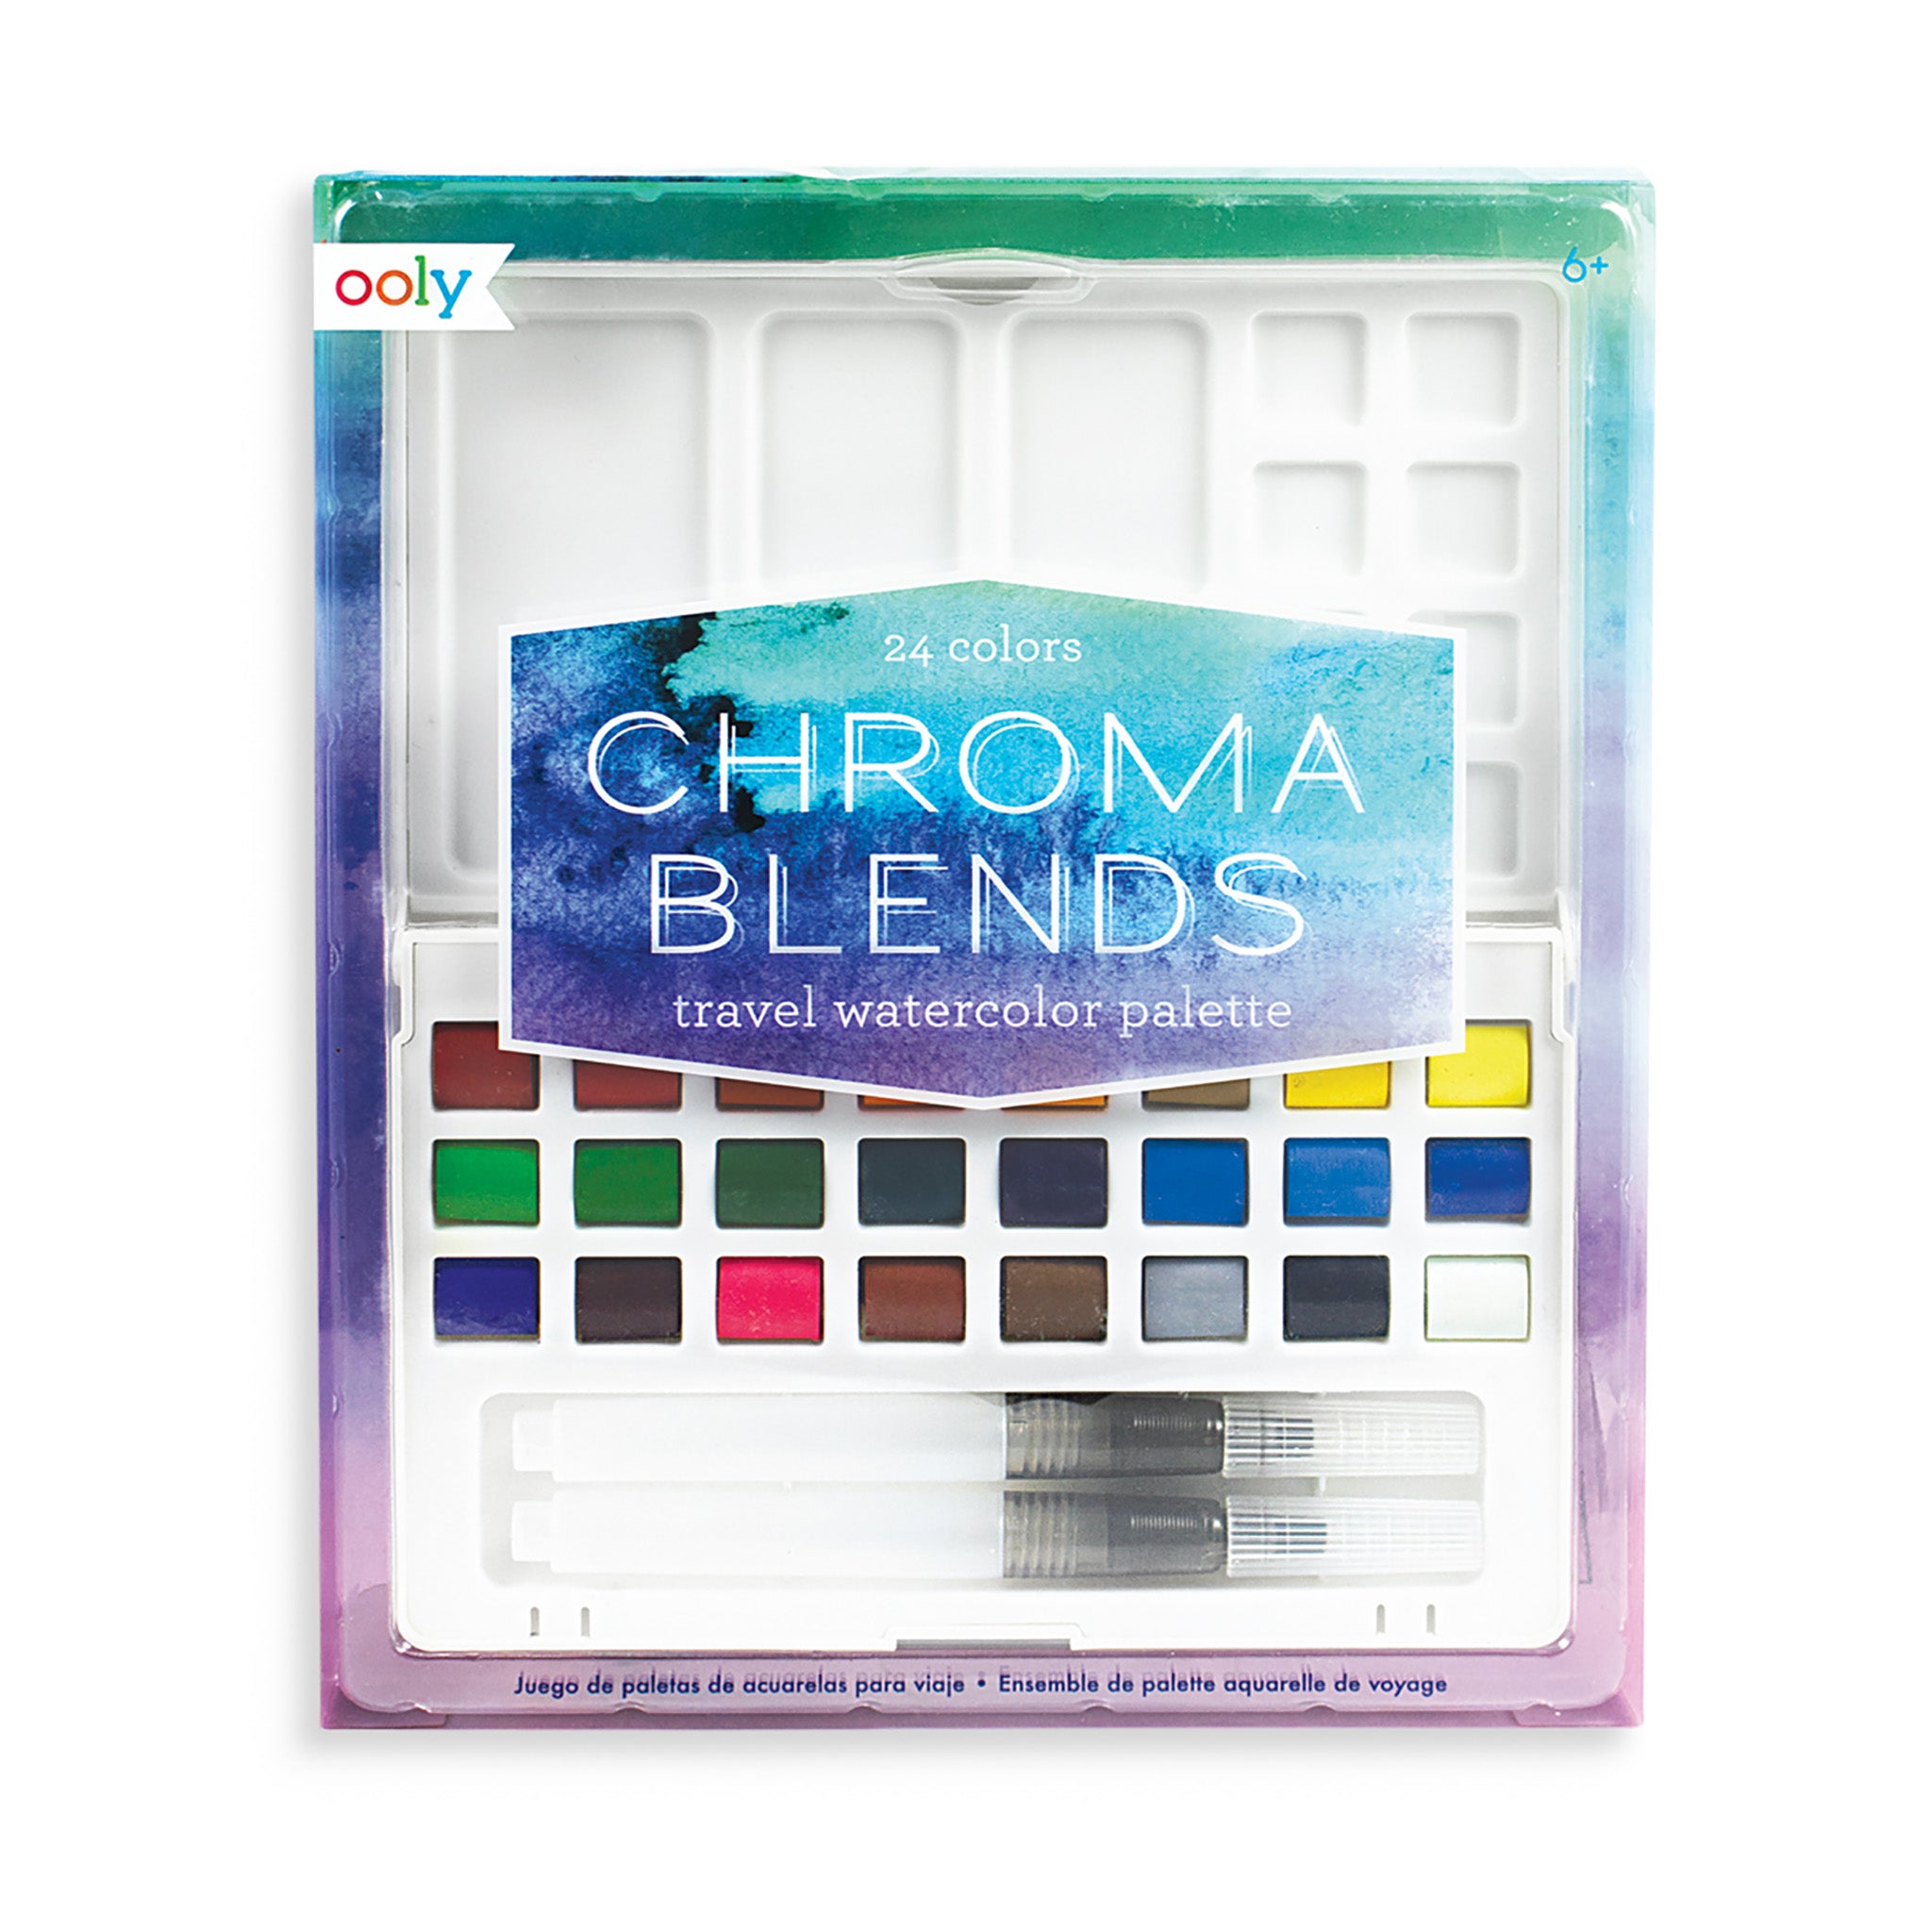 Chroma Blends Travel Watercolor Palette - Getty Museum Store